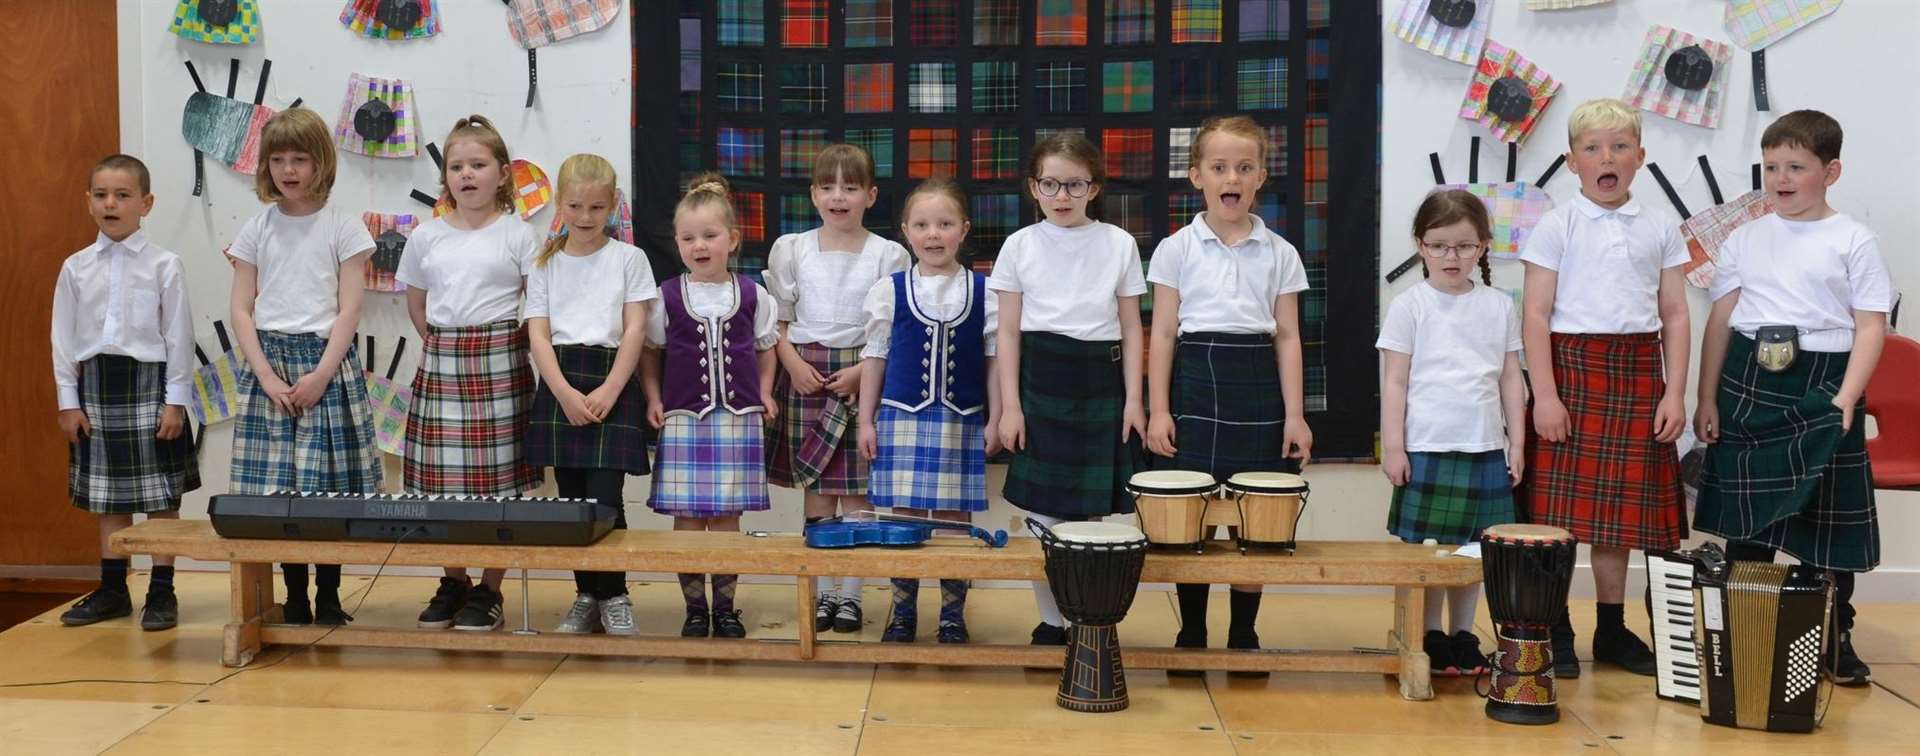 Melvich Primary School won the P1-3 action song section. Picture: Jim A Johnston